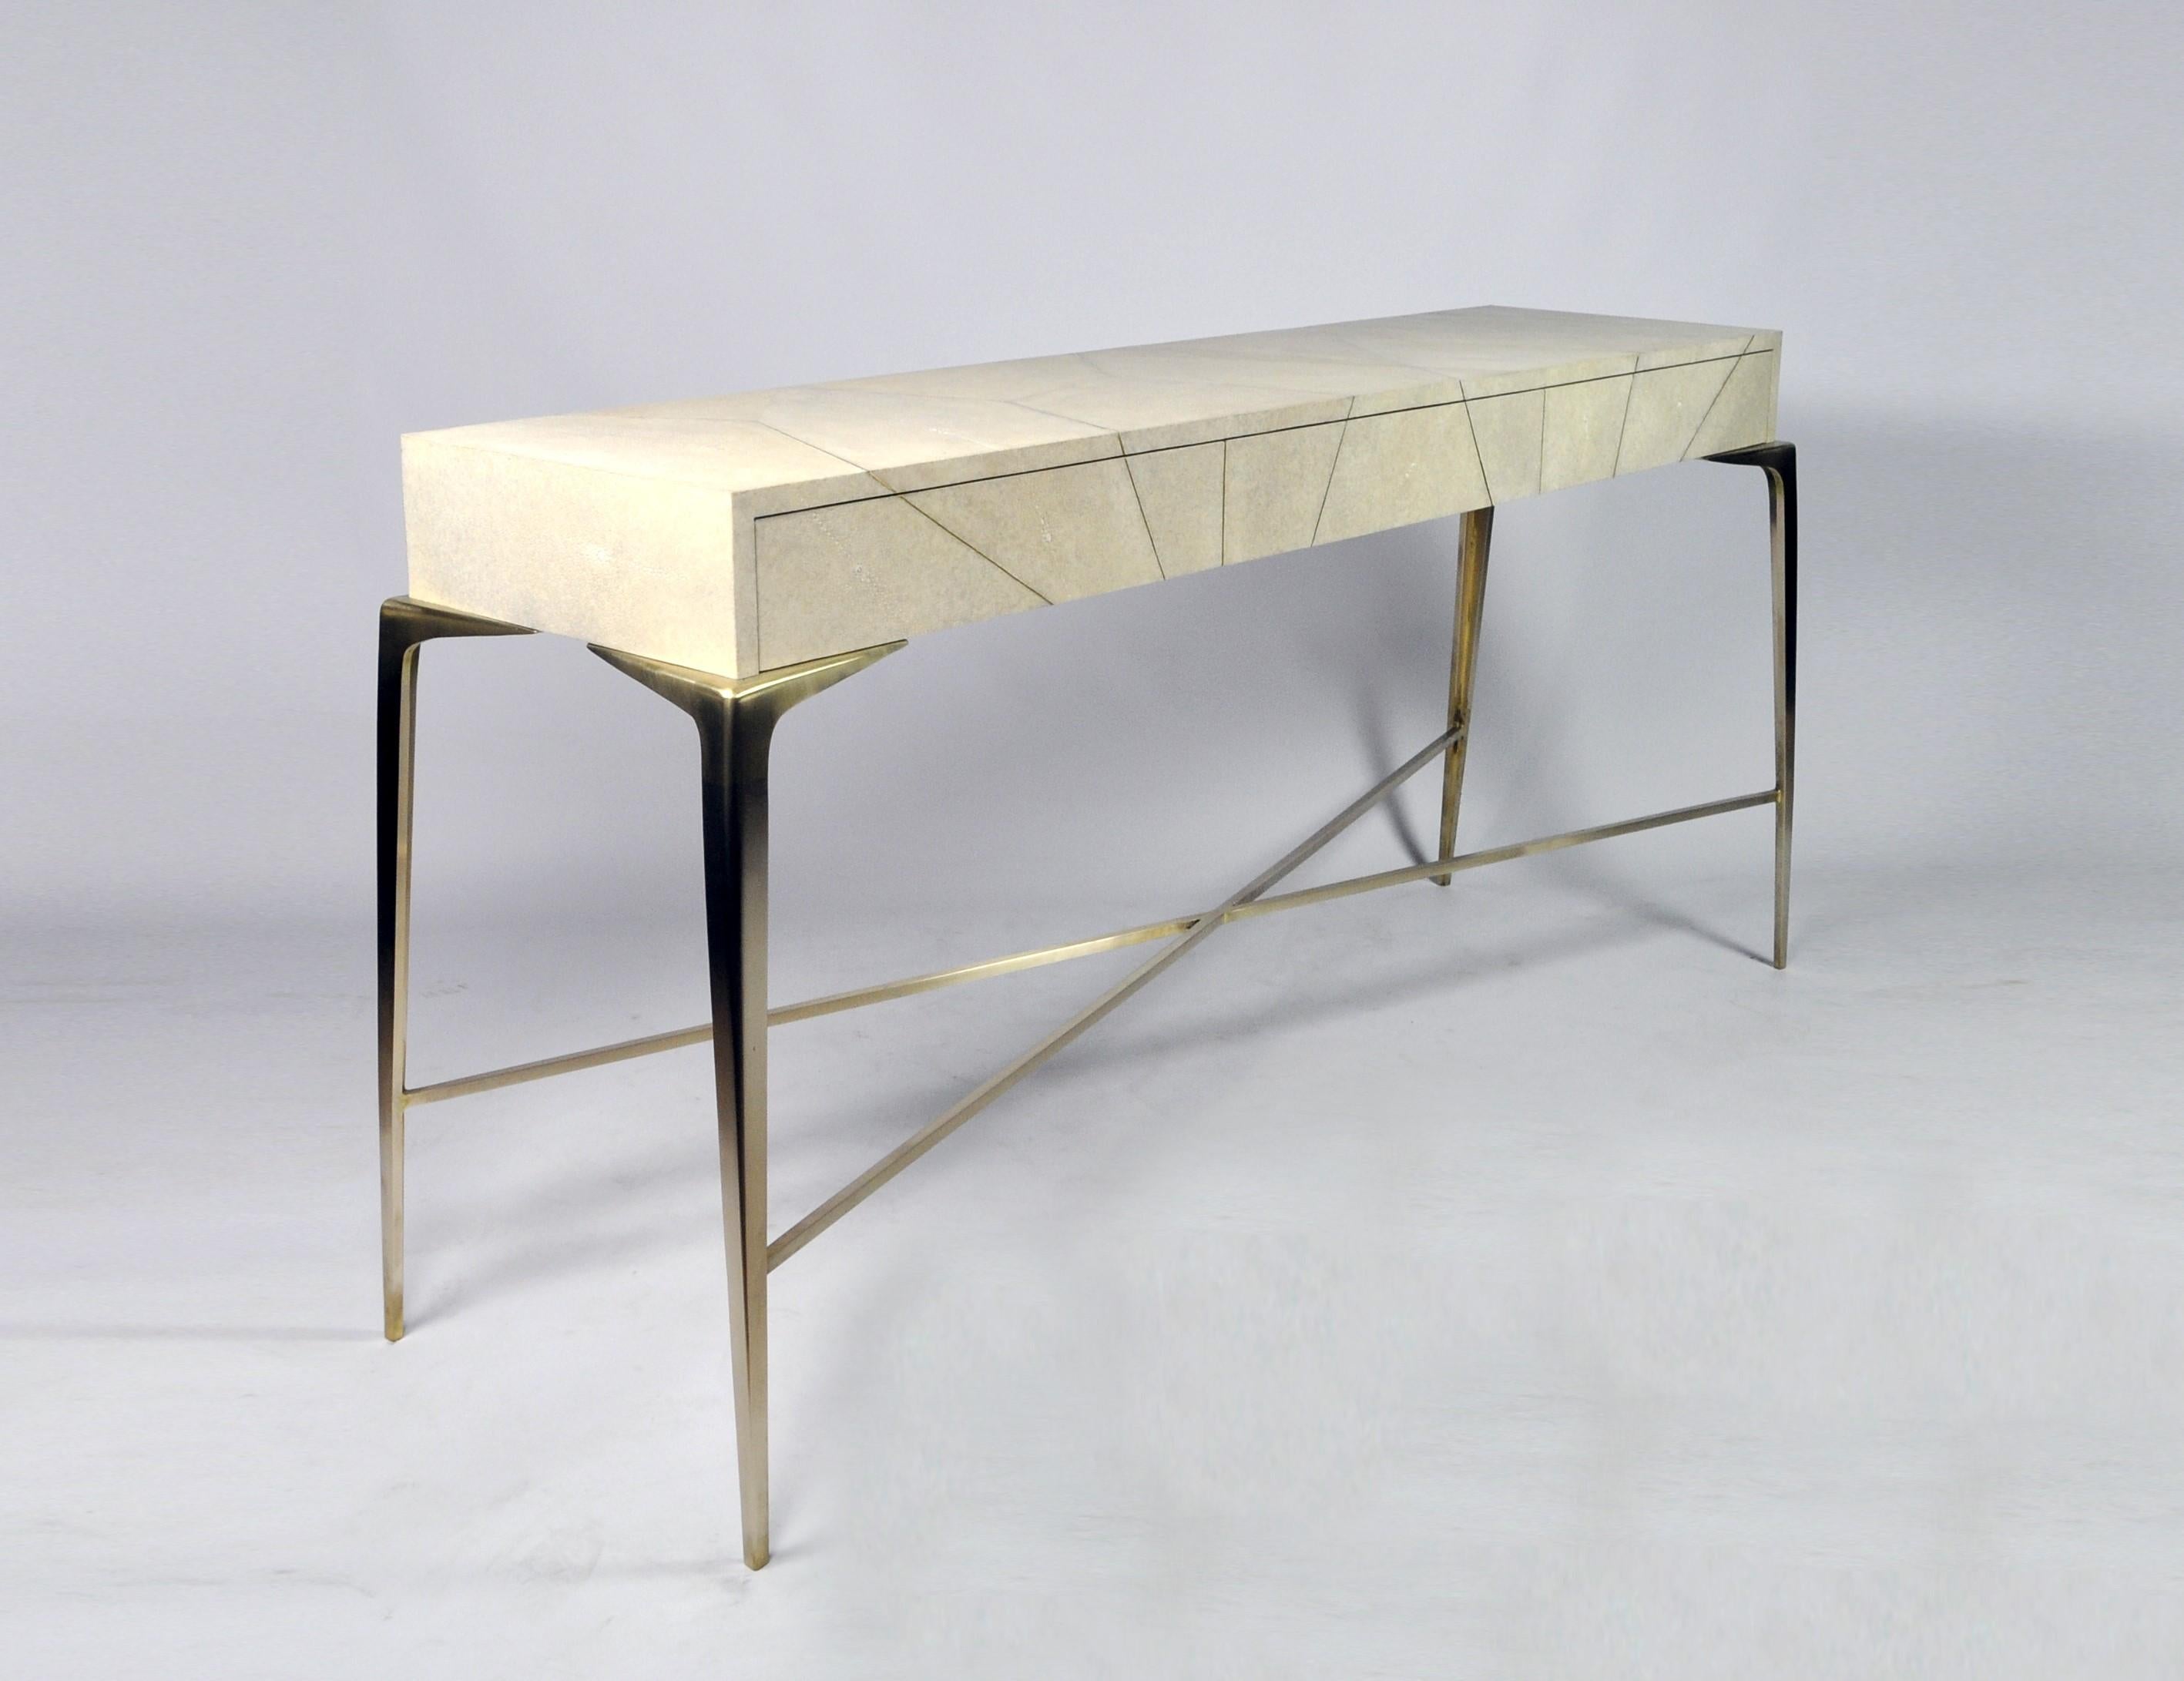 The console table Hydra is made of genuine shagreen with brass trims .
It has three drawers and the legs are made in solid brass with a brushed finishing.
The interior of the drawers are in light oak veneer.
This console will settle very well in